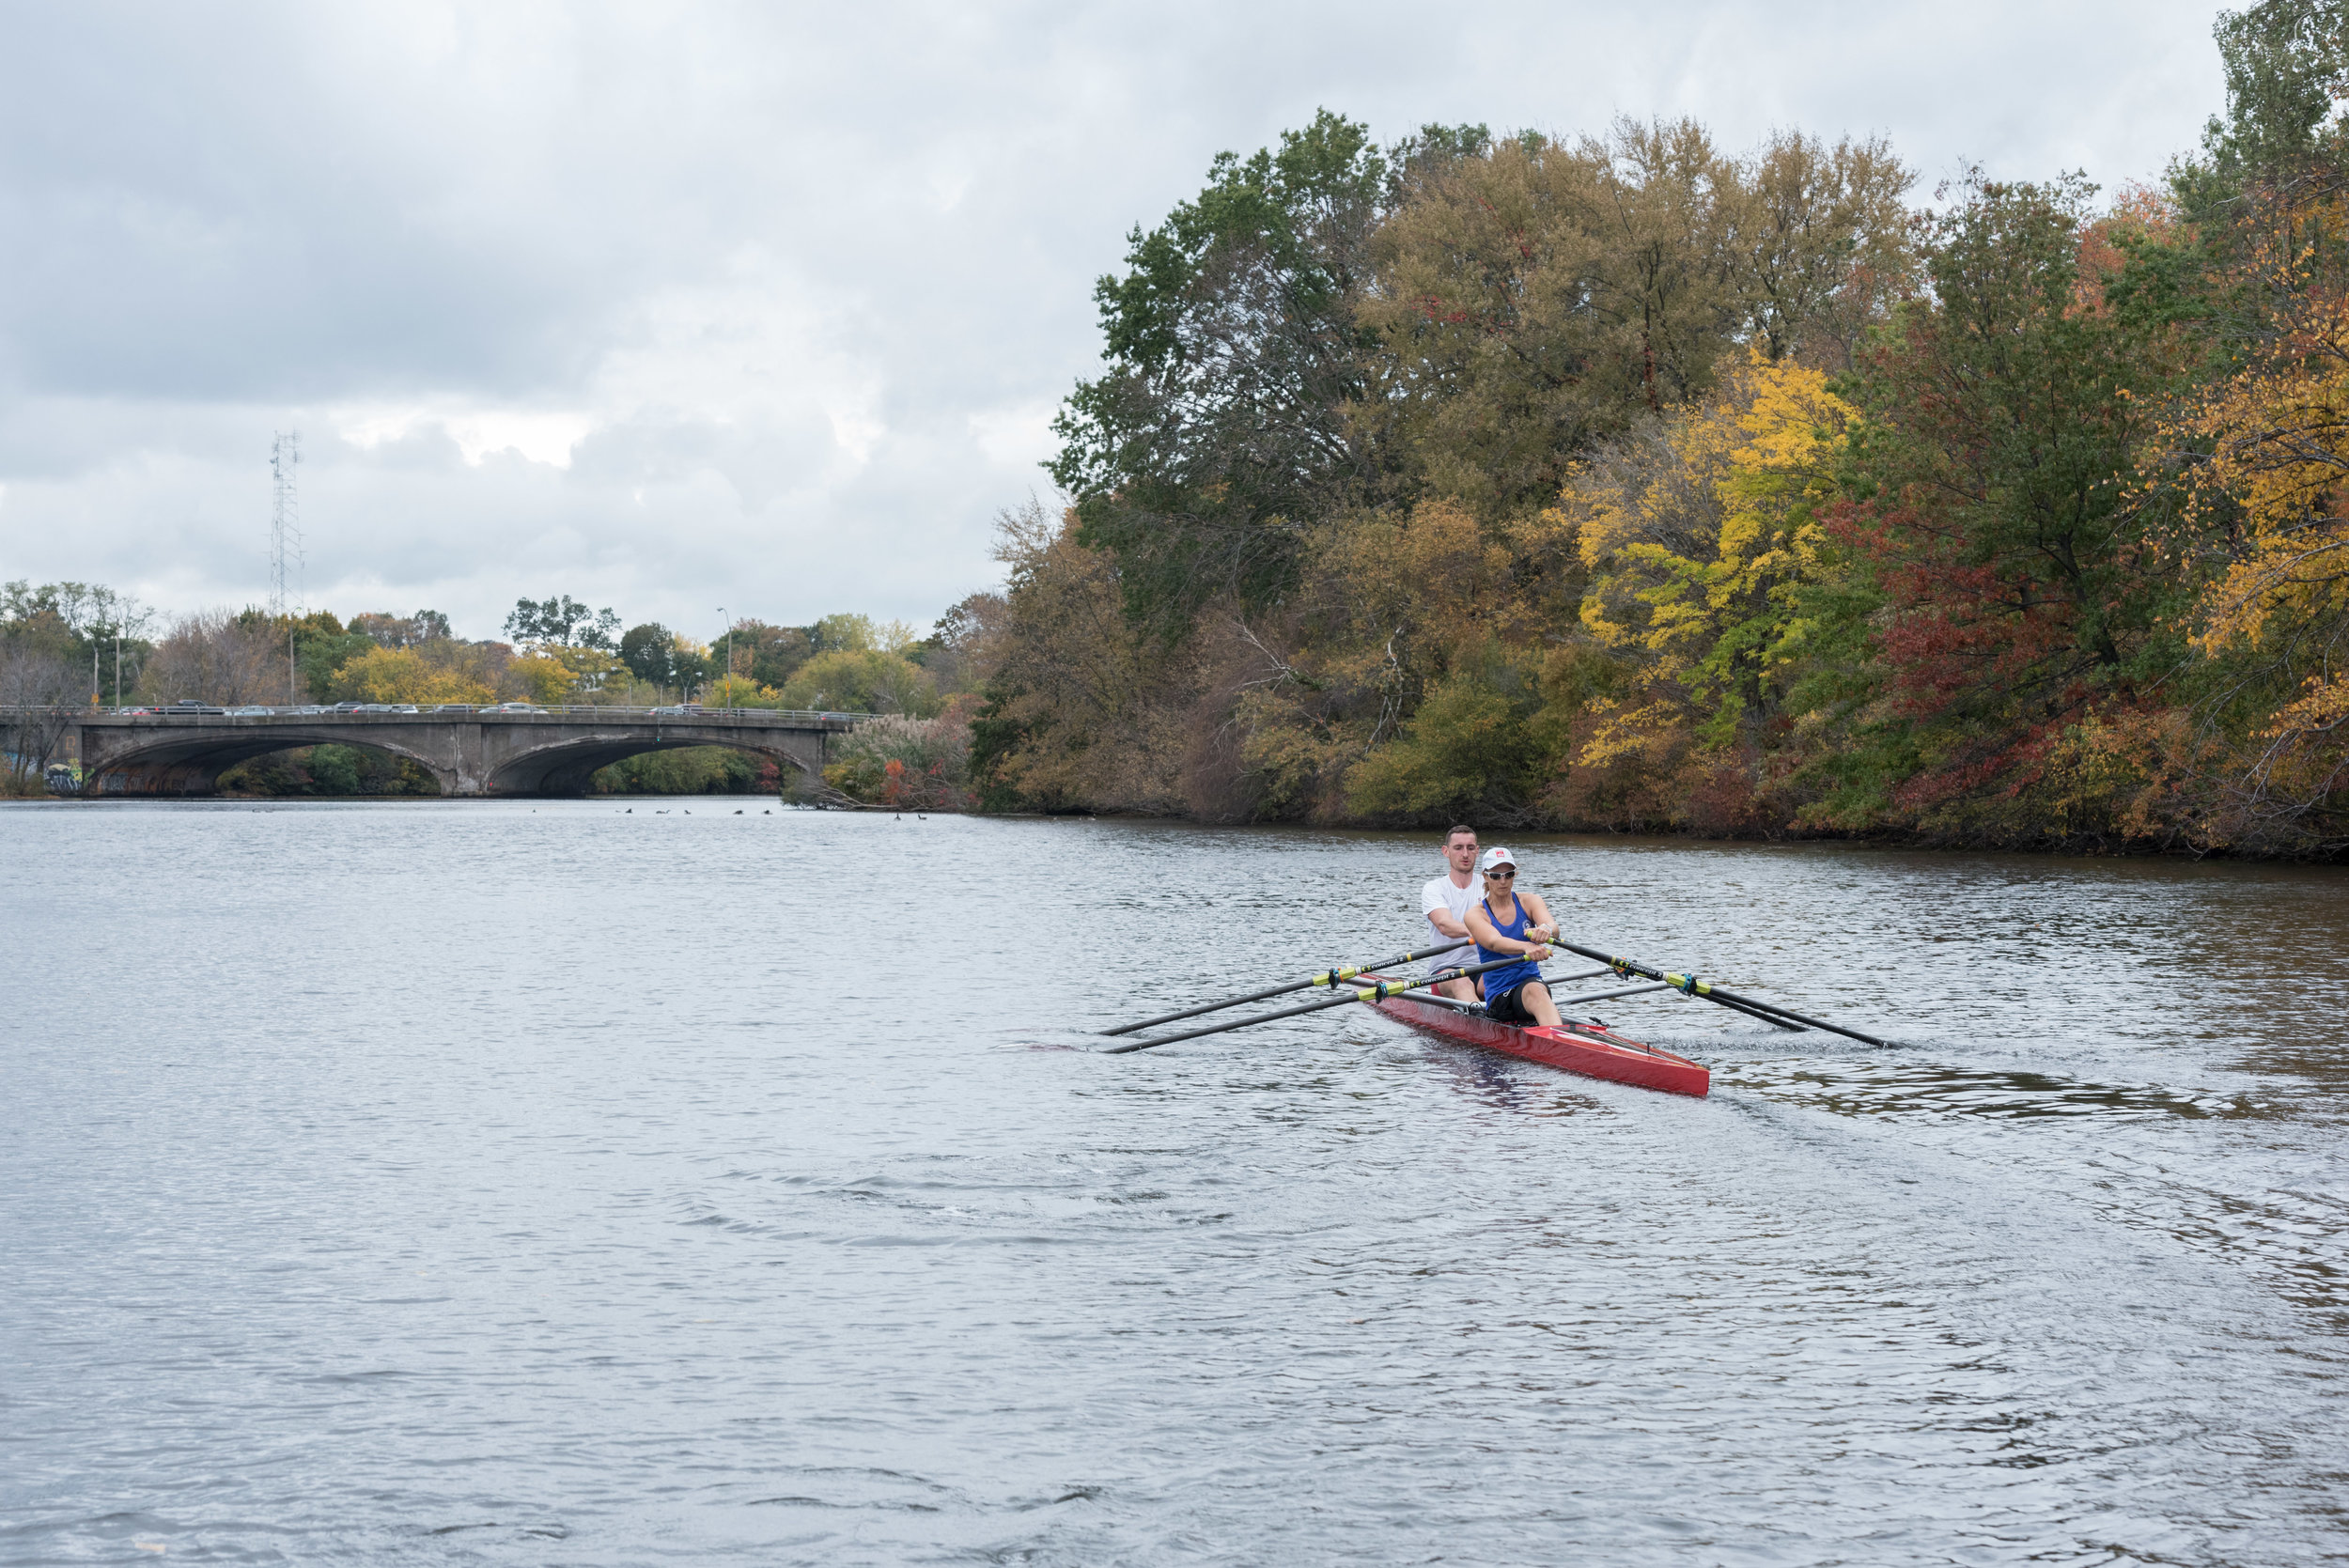  Para-rower Johanna Beyer, 35, and traditional rower Matt Wheeler, 29, practice for inclusion doubles on Friday, Oct. 21. They came in second in the event. This was the first year for Head of the Charles features having medaled para-rowing and inclus